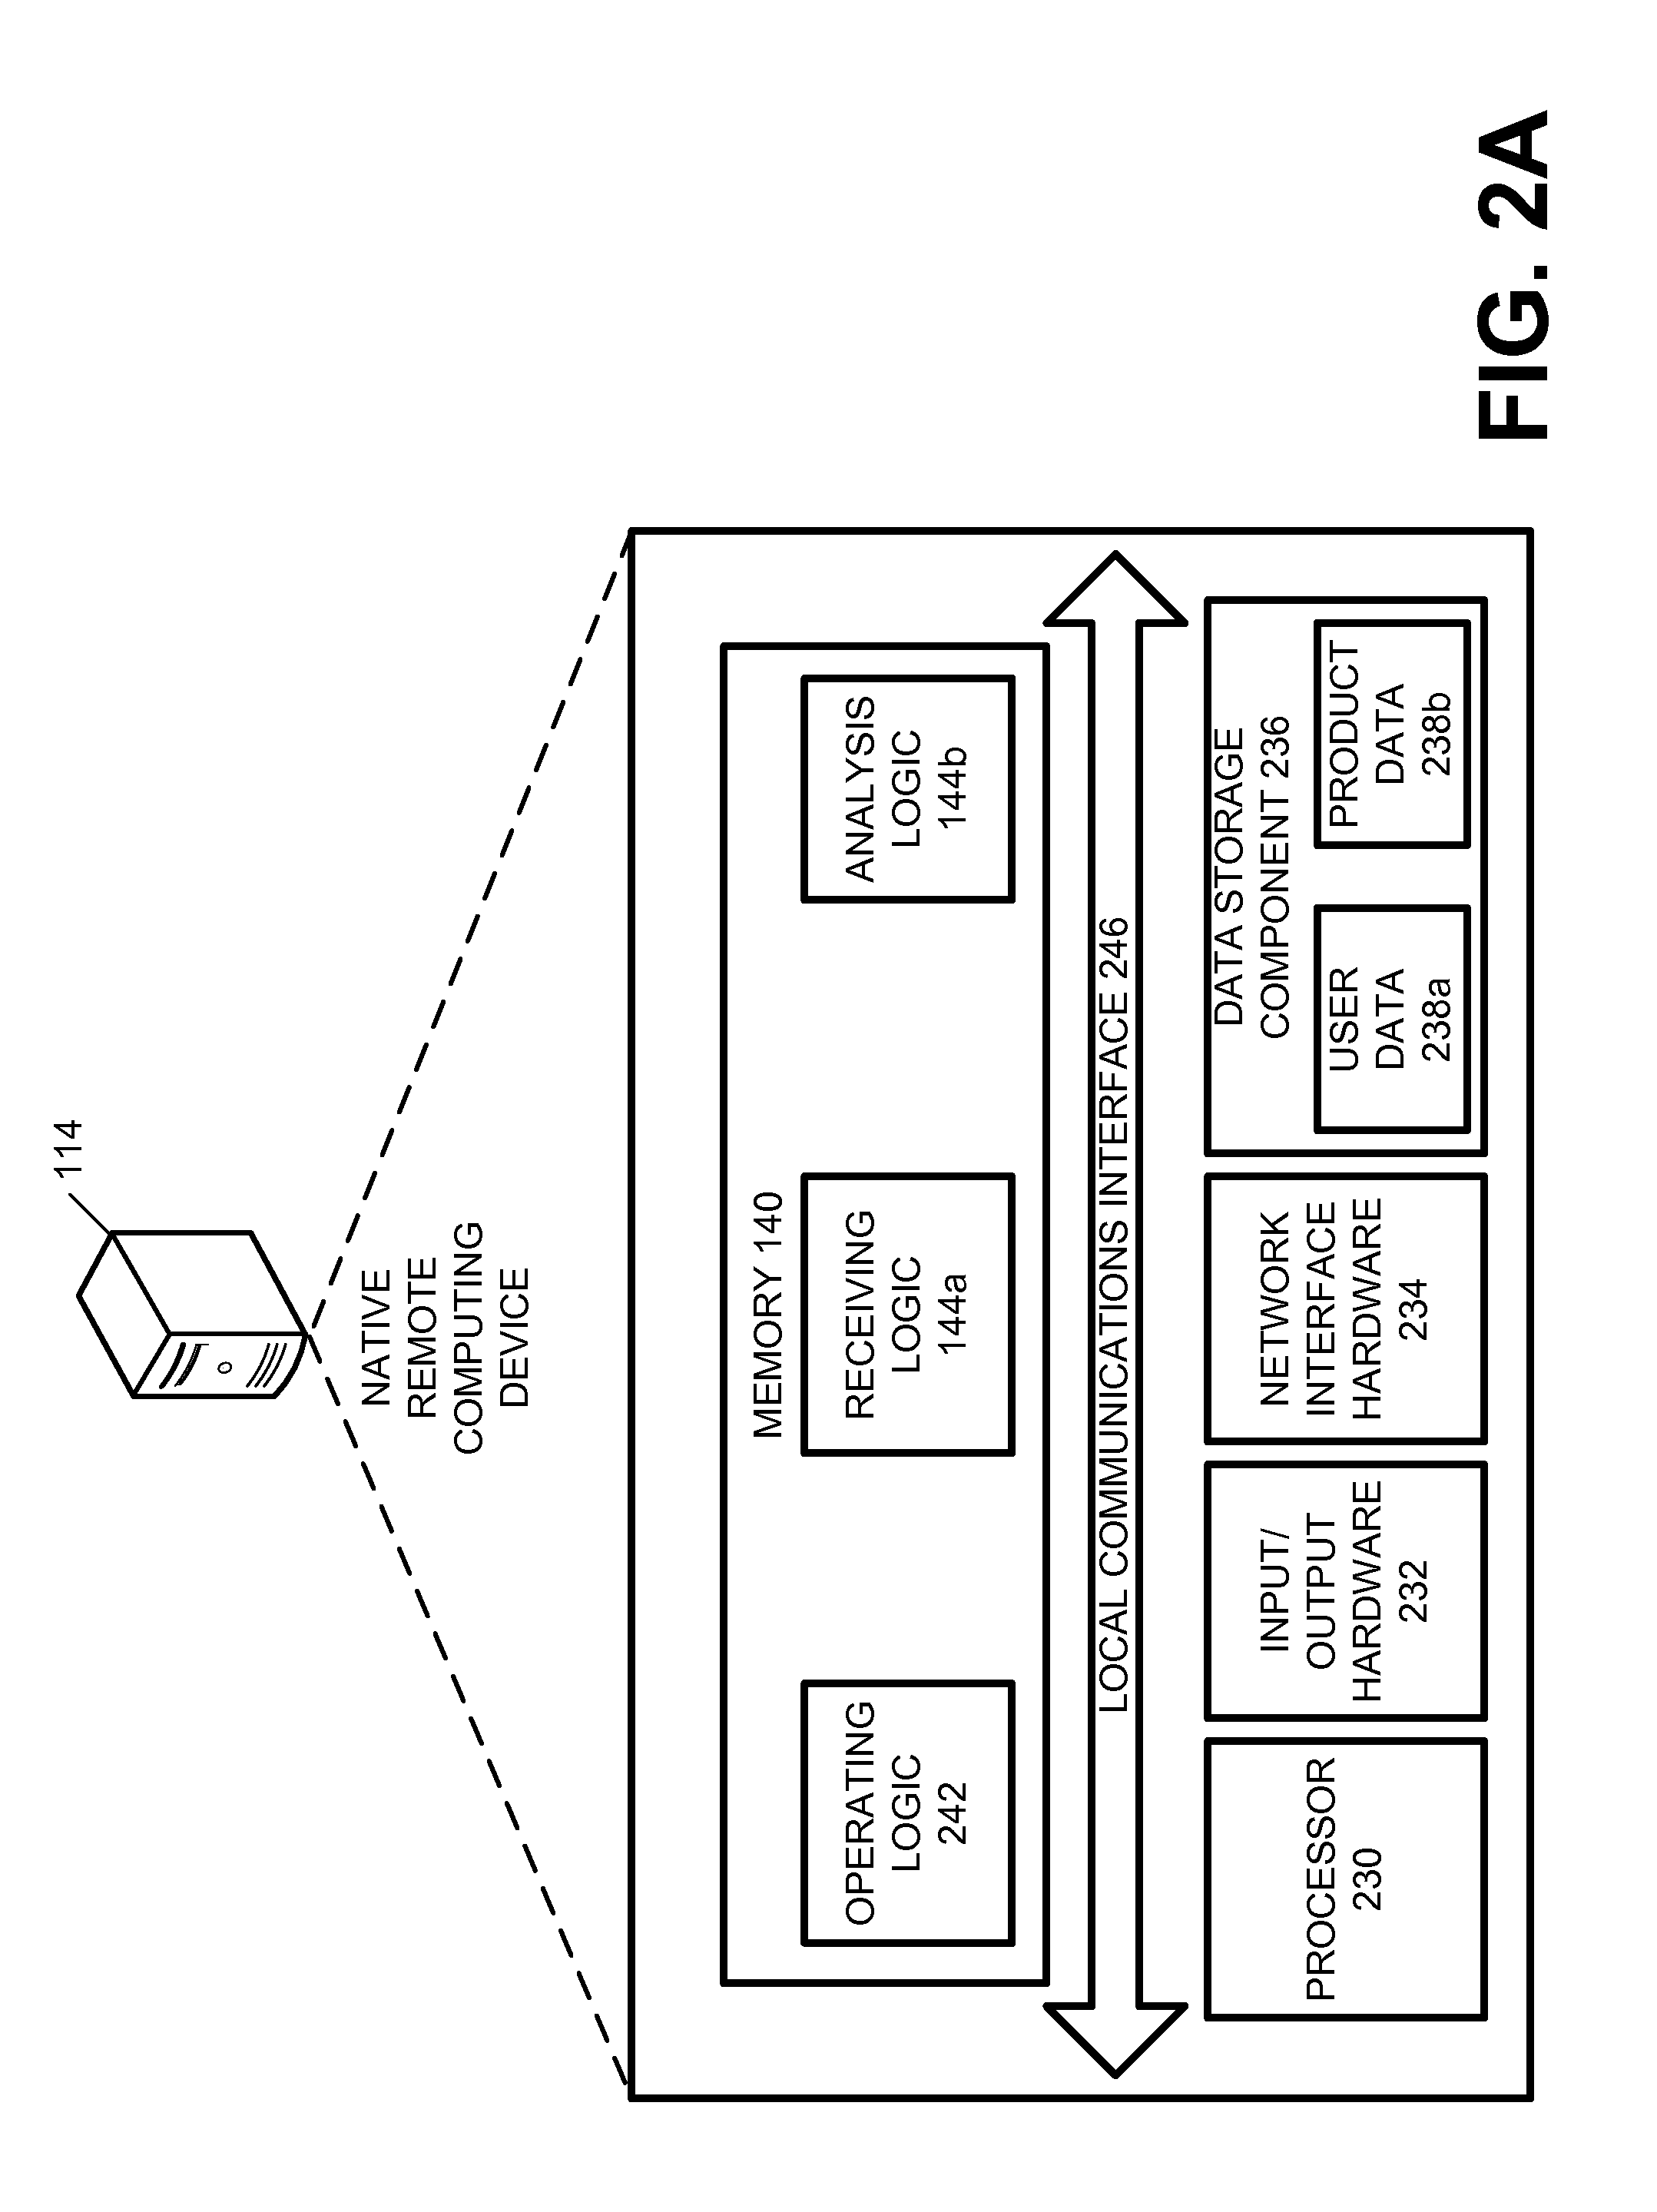 Systems, devices, and methods for image analysis